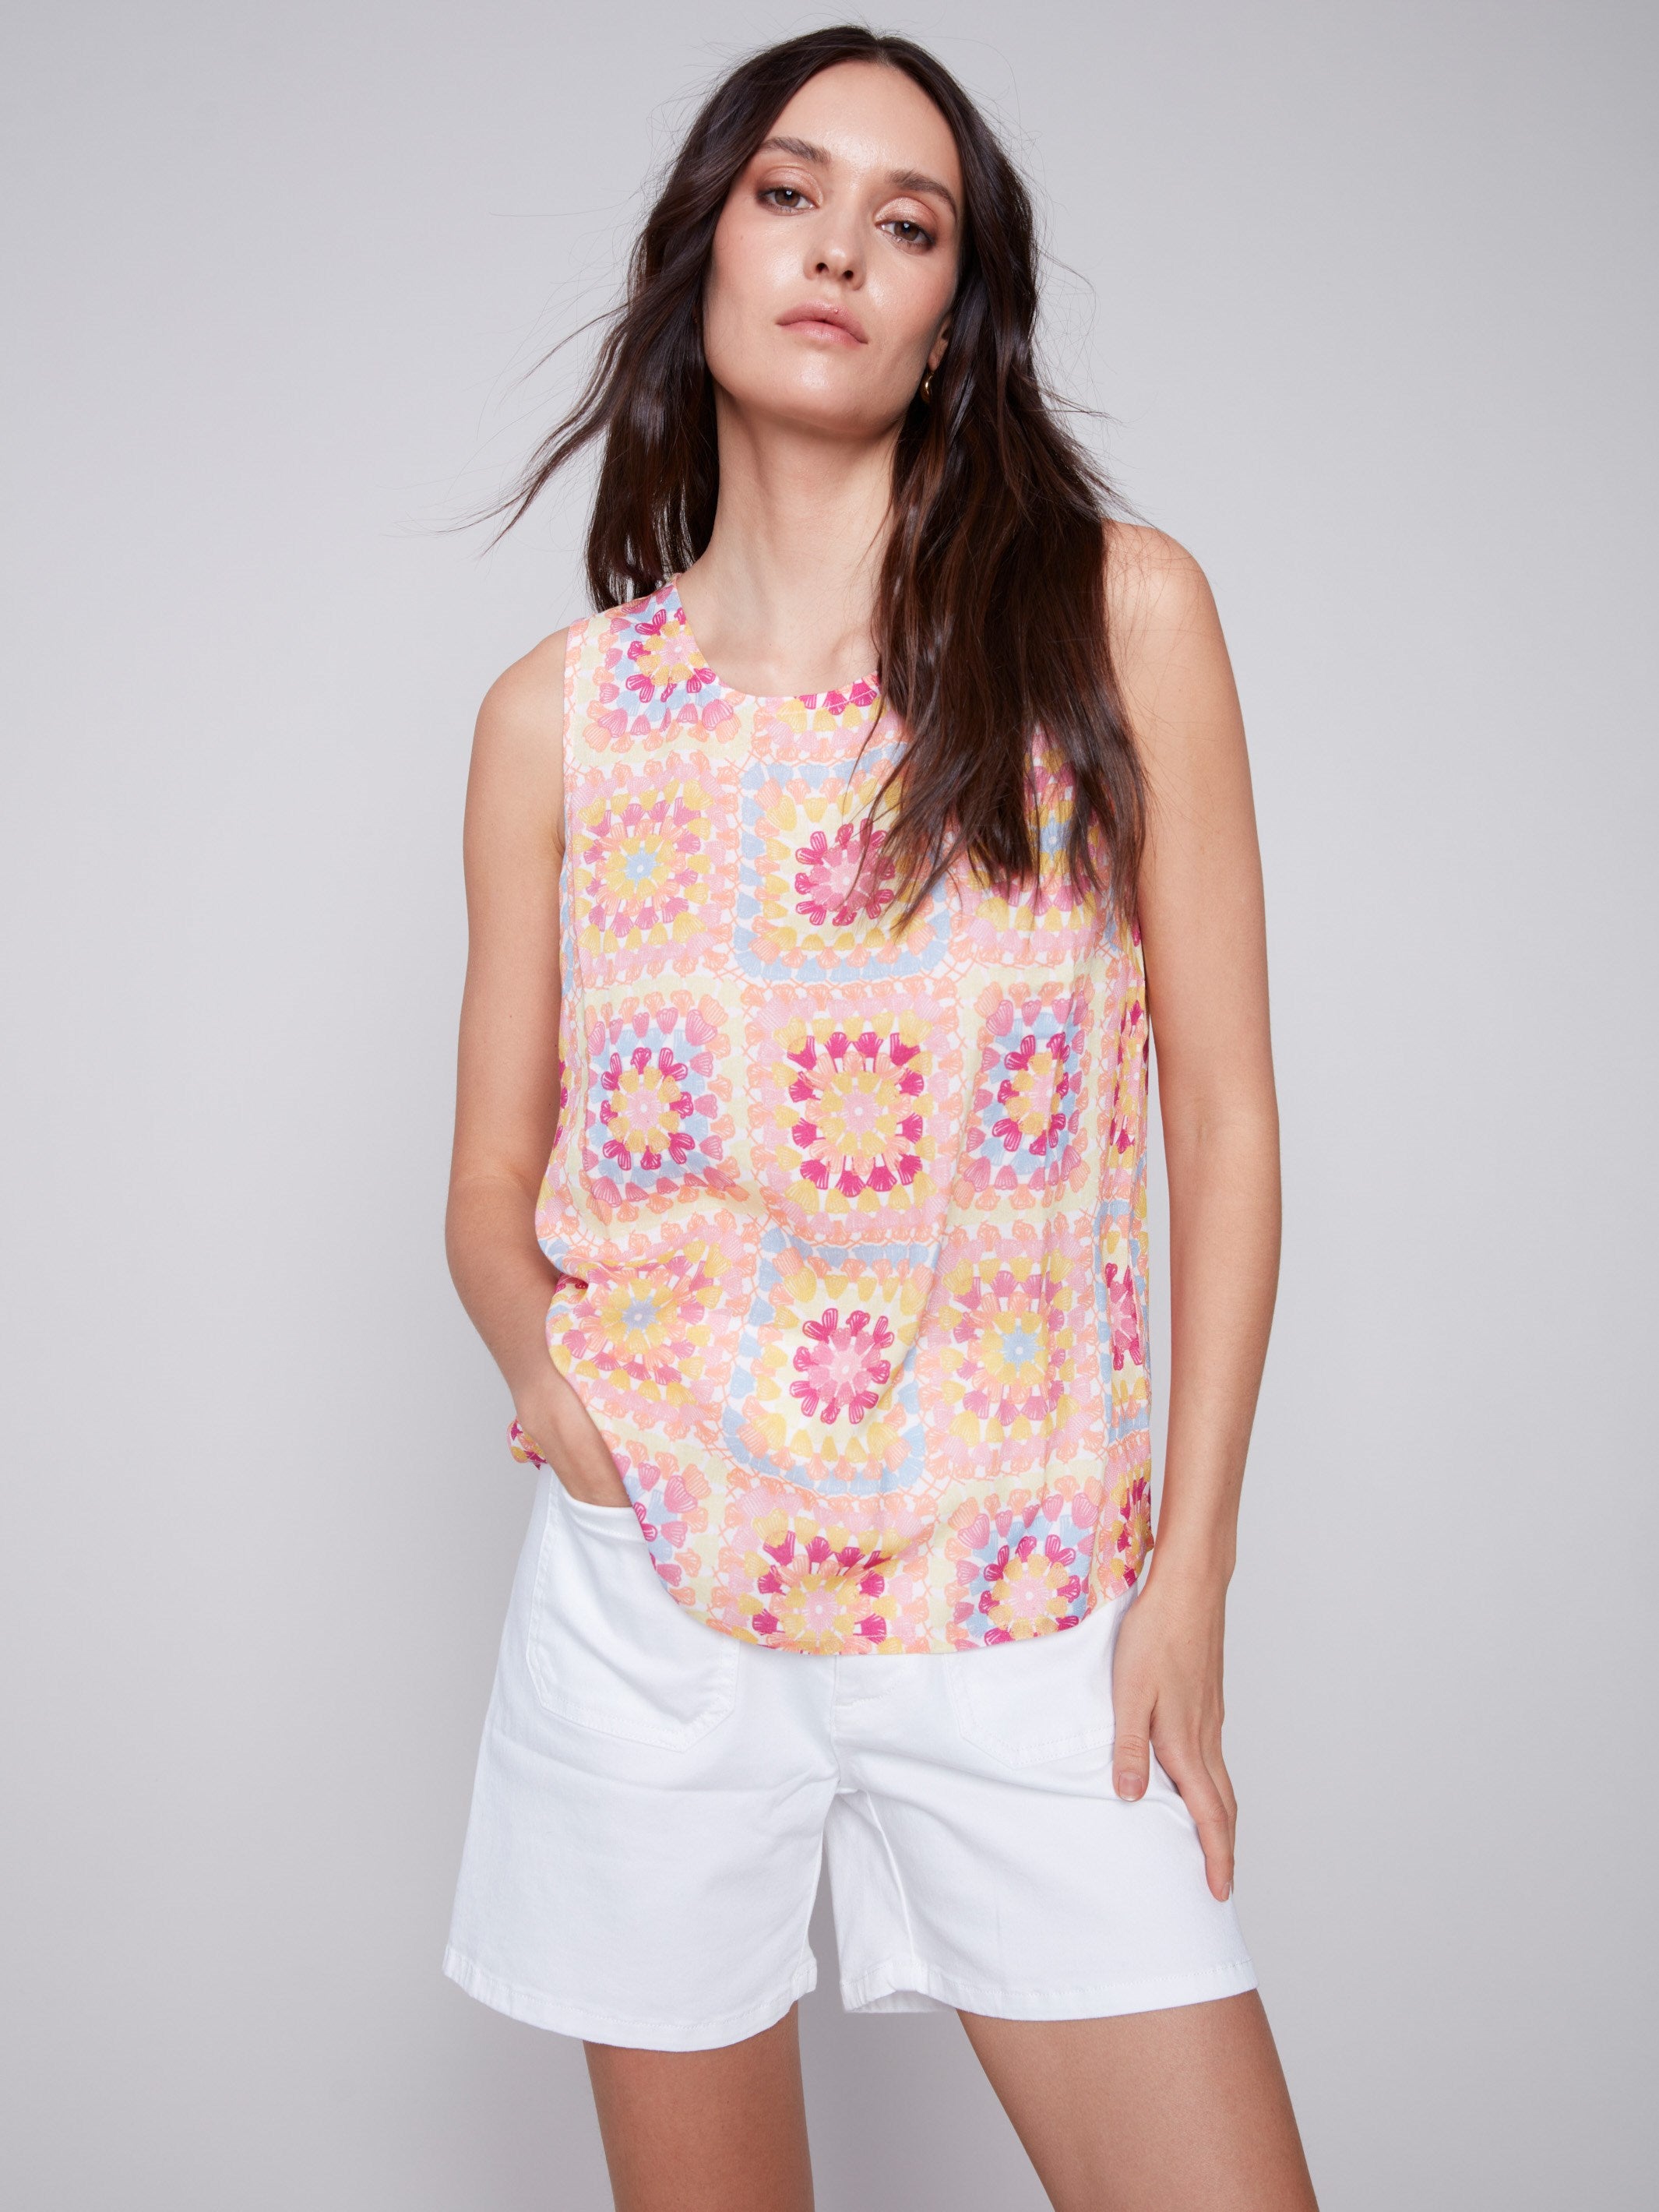 Printed Sleeveless Top - Festival - Charlie B Collection Canada - Image 1